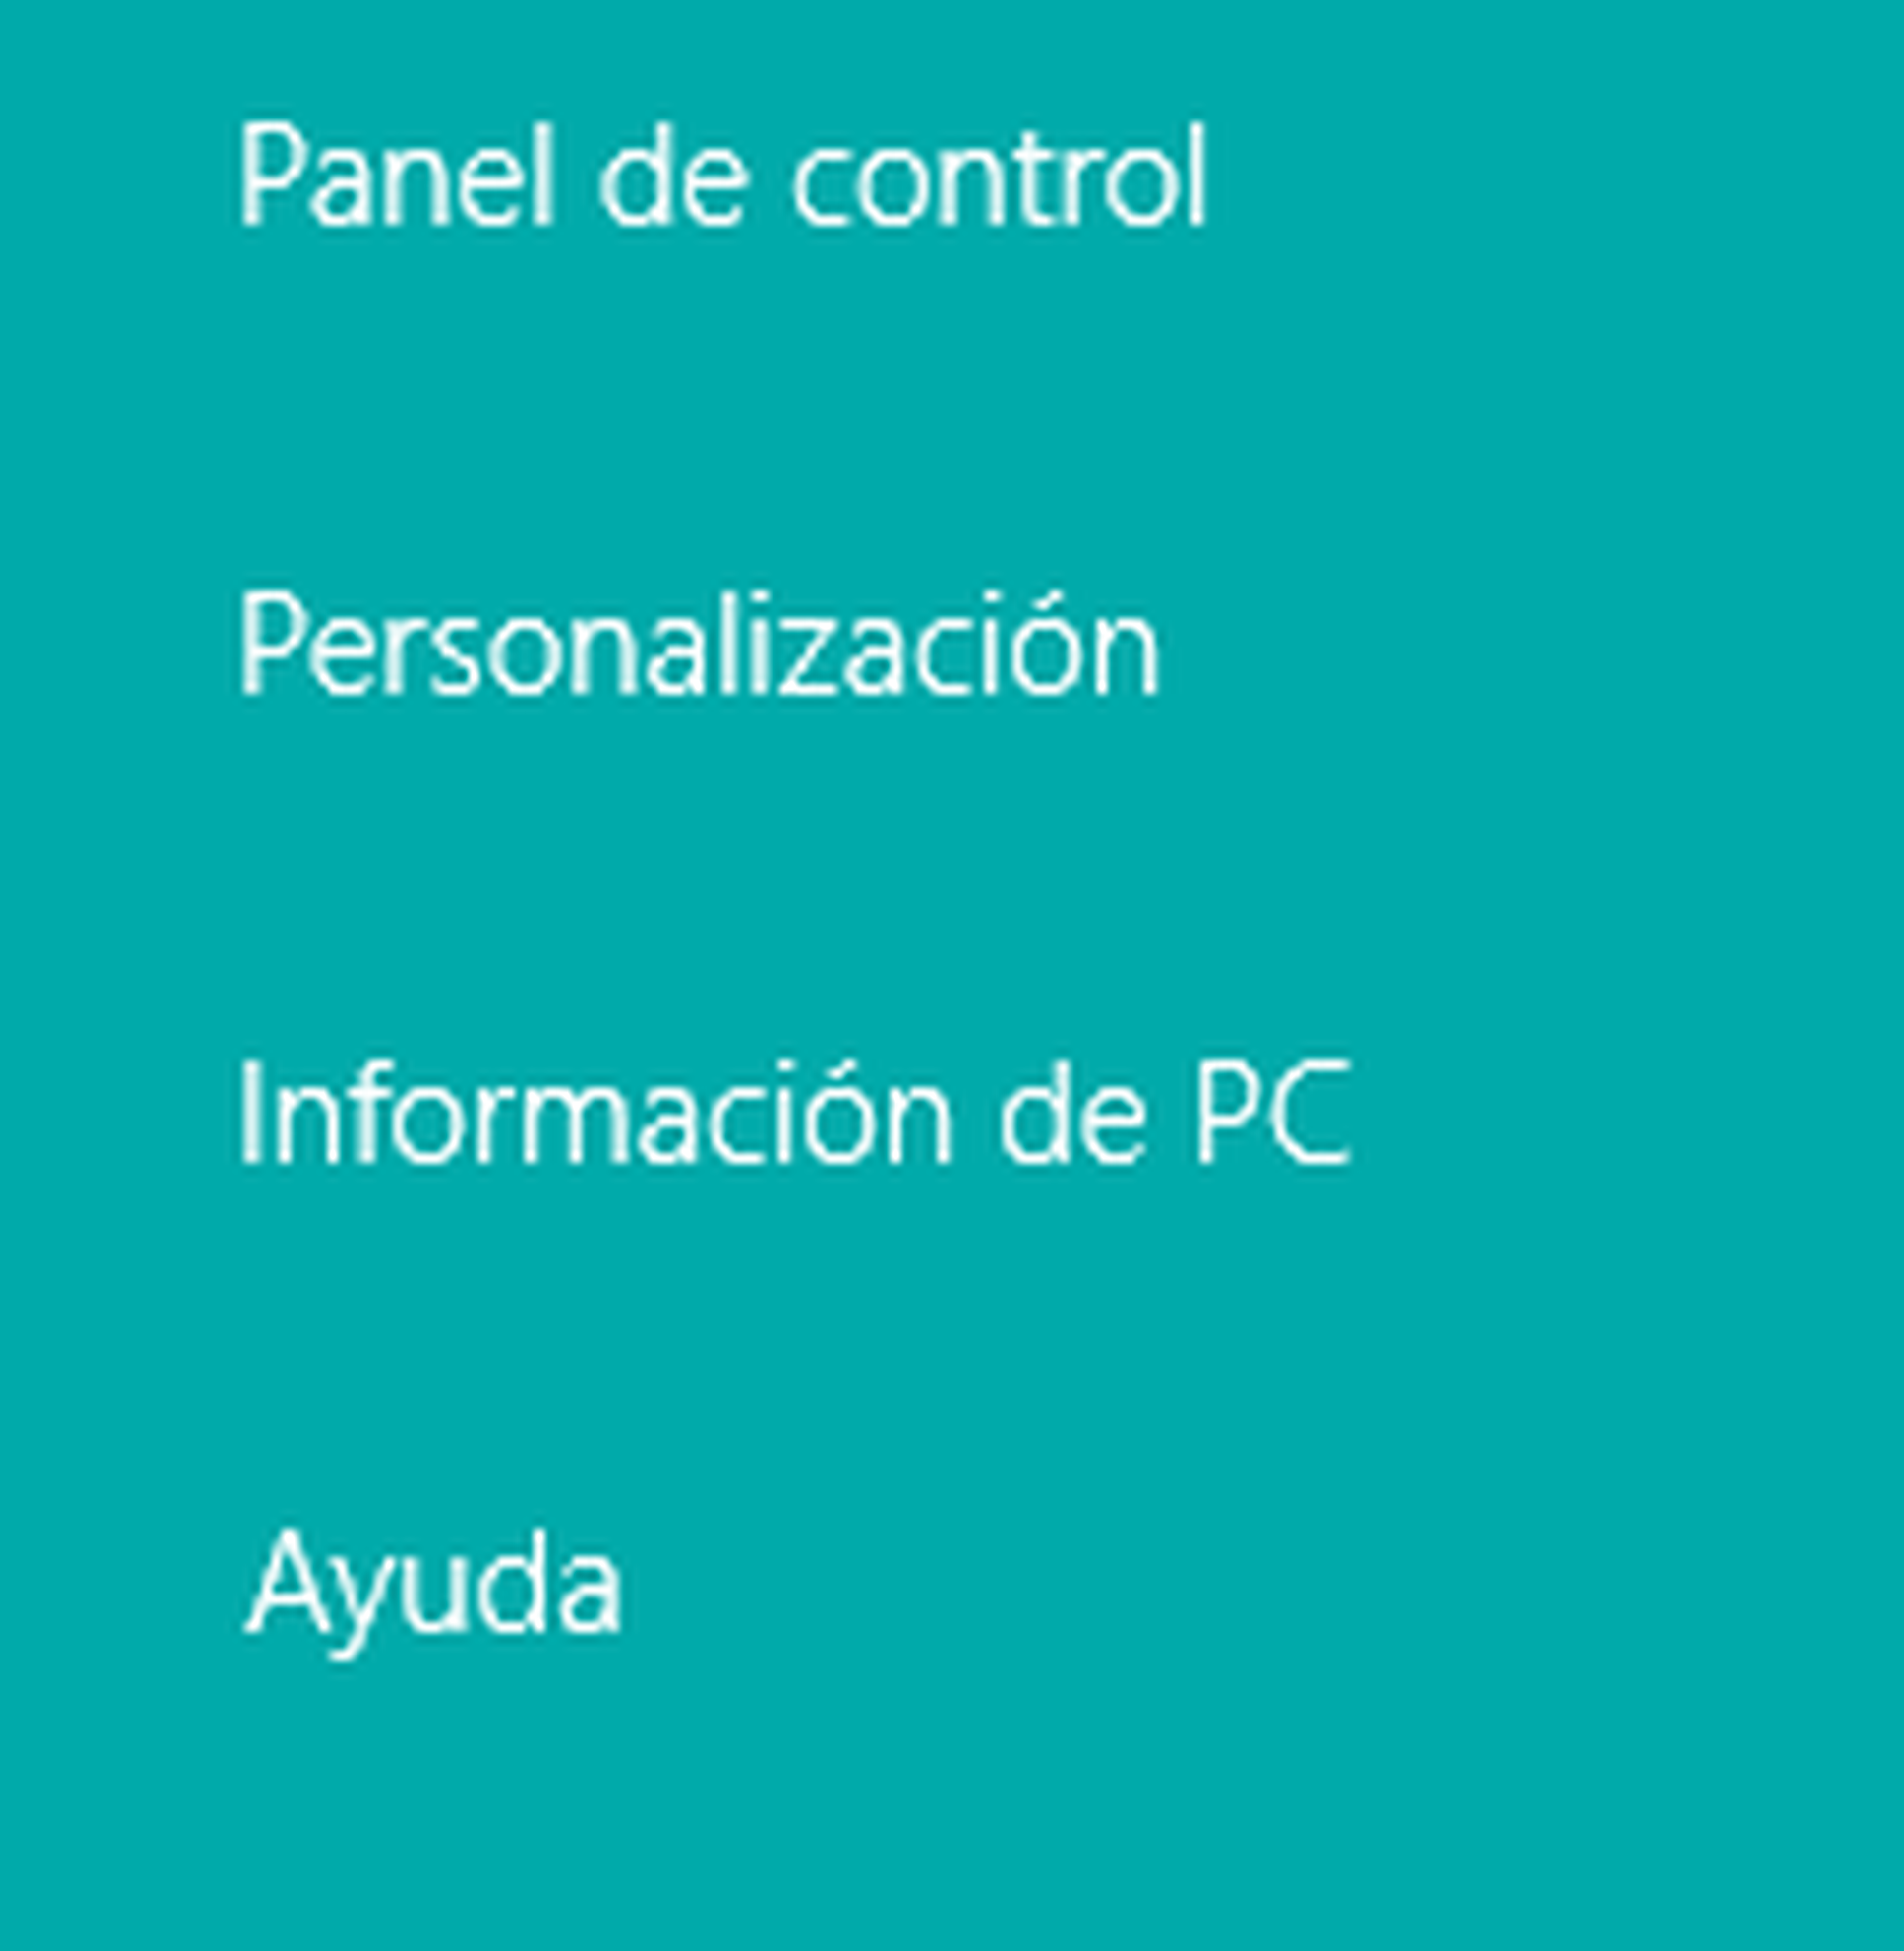 Where is the Control Panel in Windows 8?